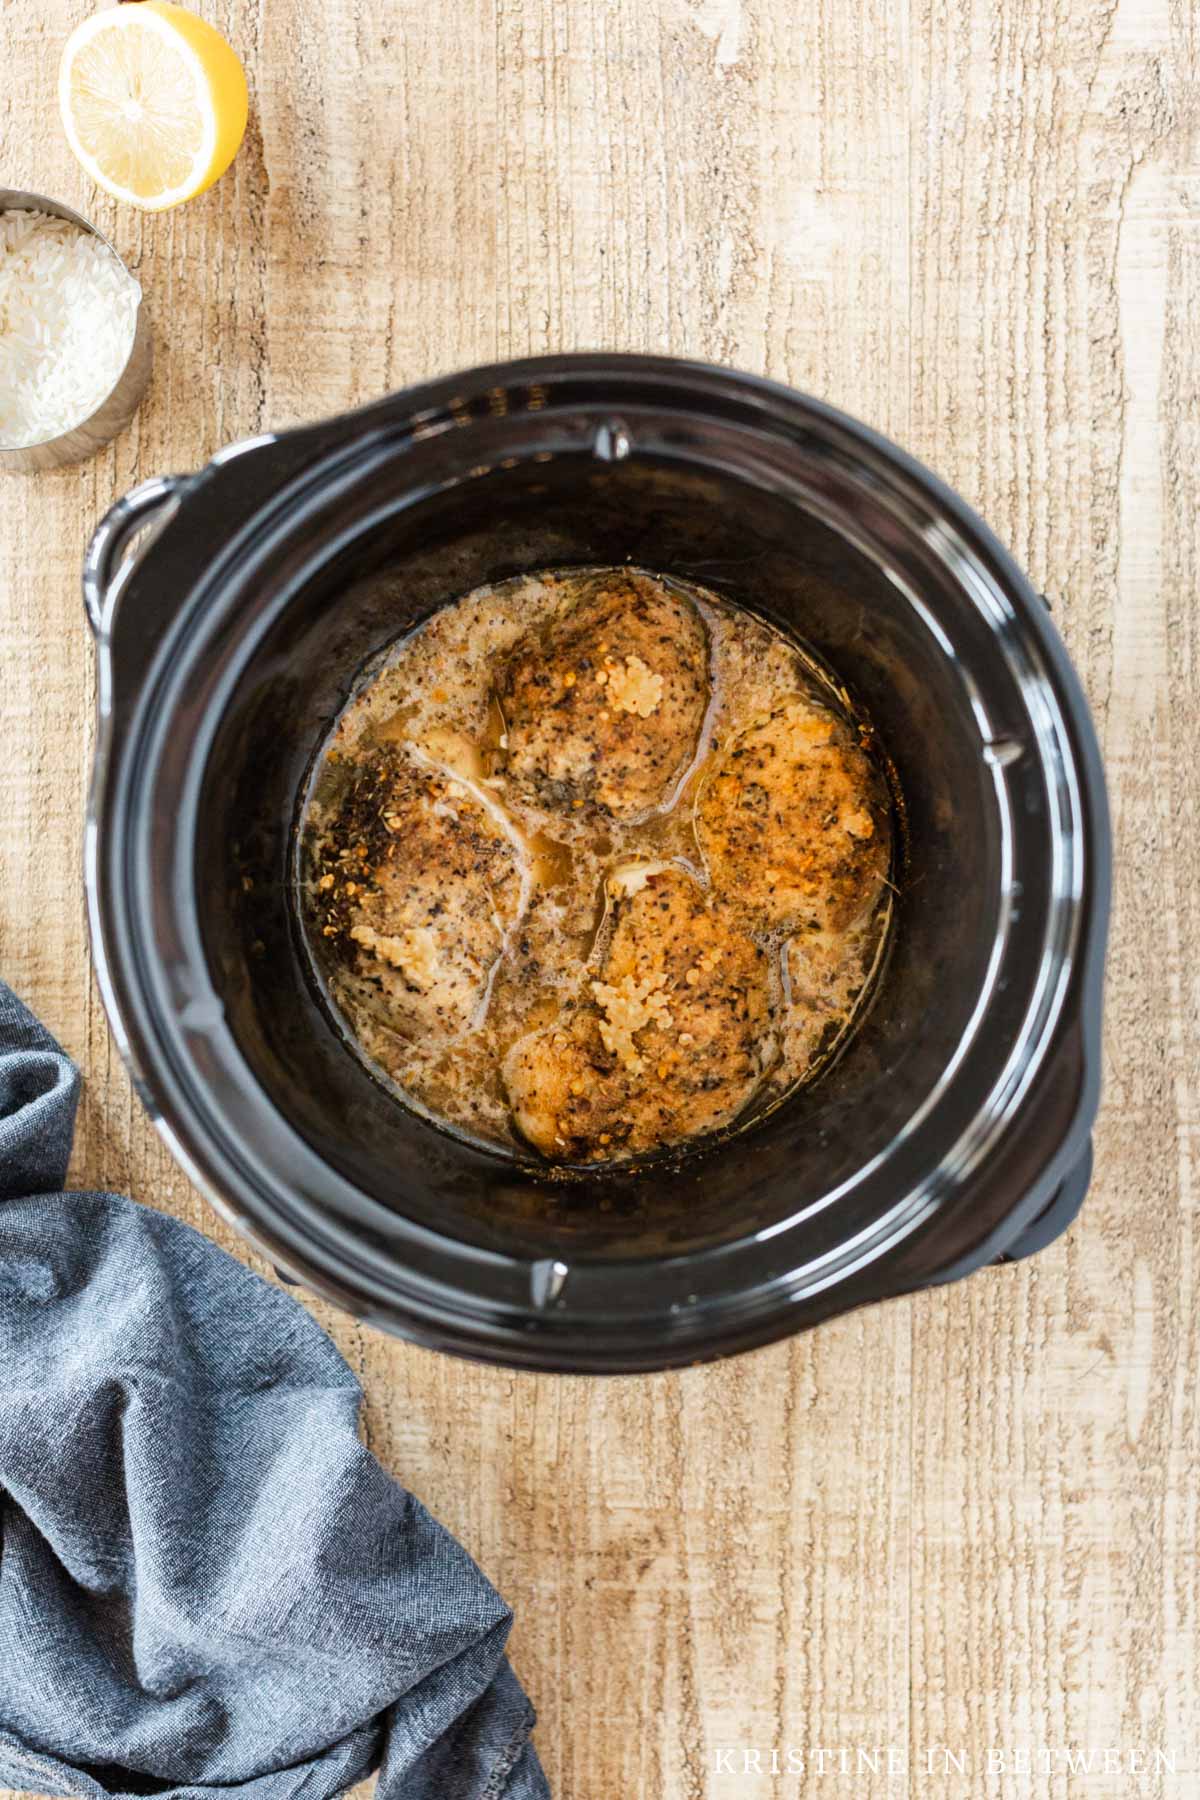 Cooked chicken thighs in a Crock-pot with garlic on top.